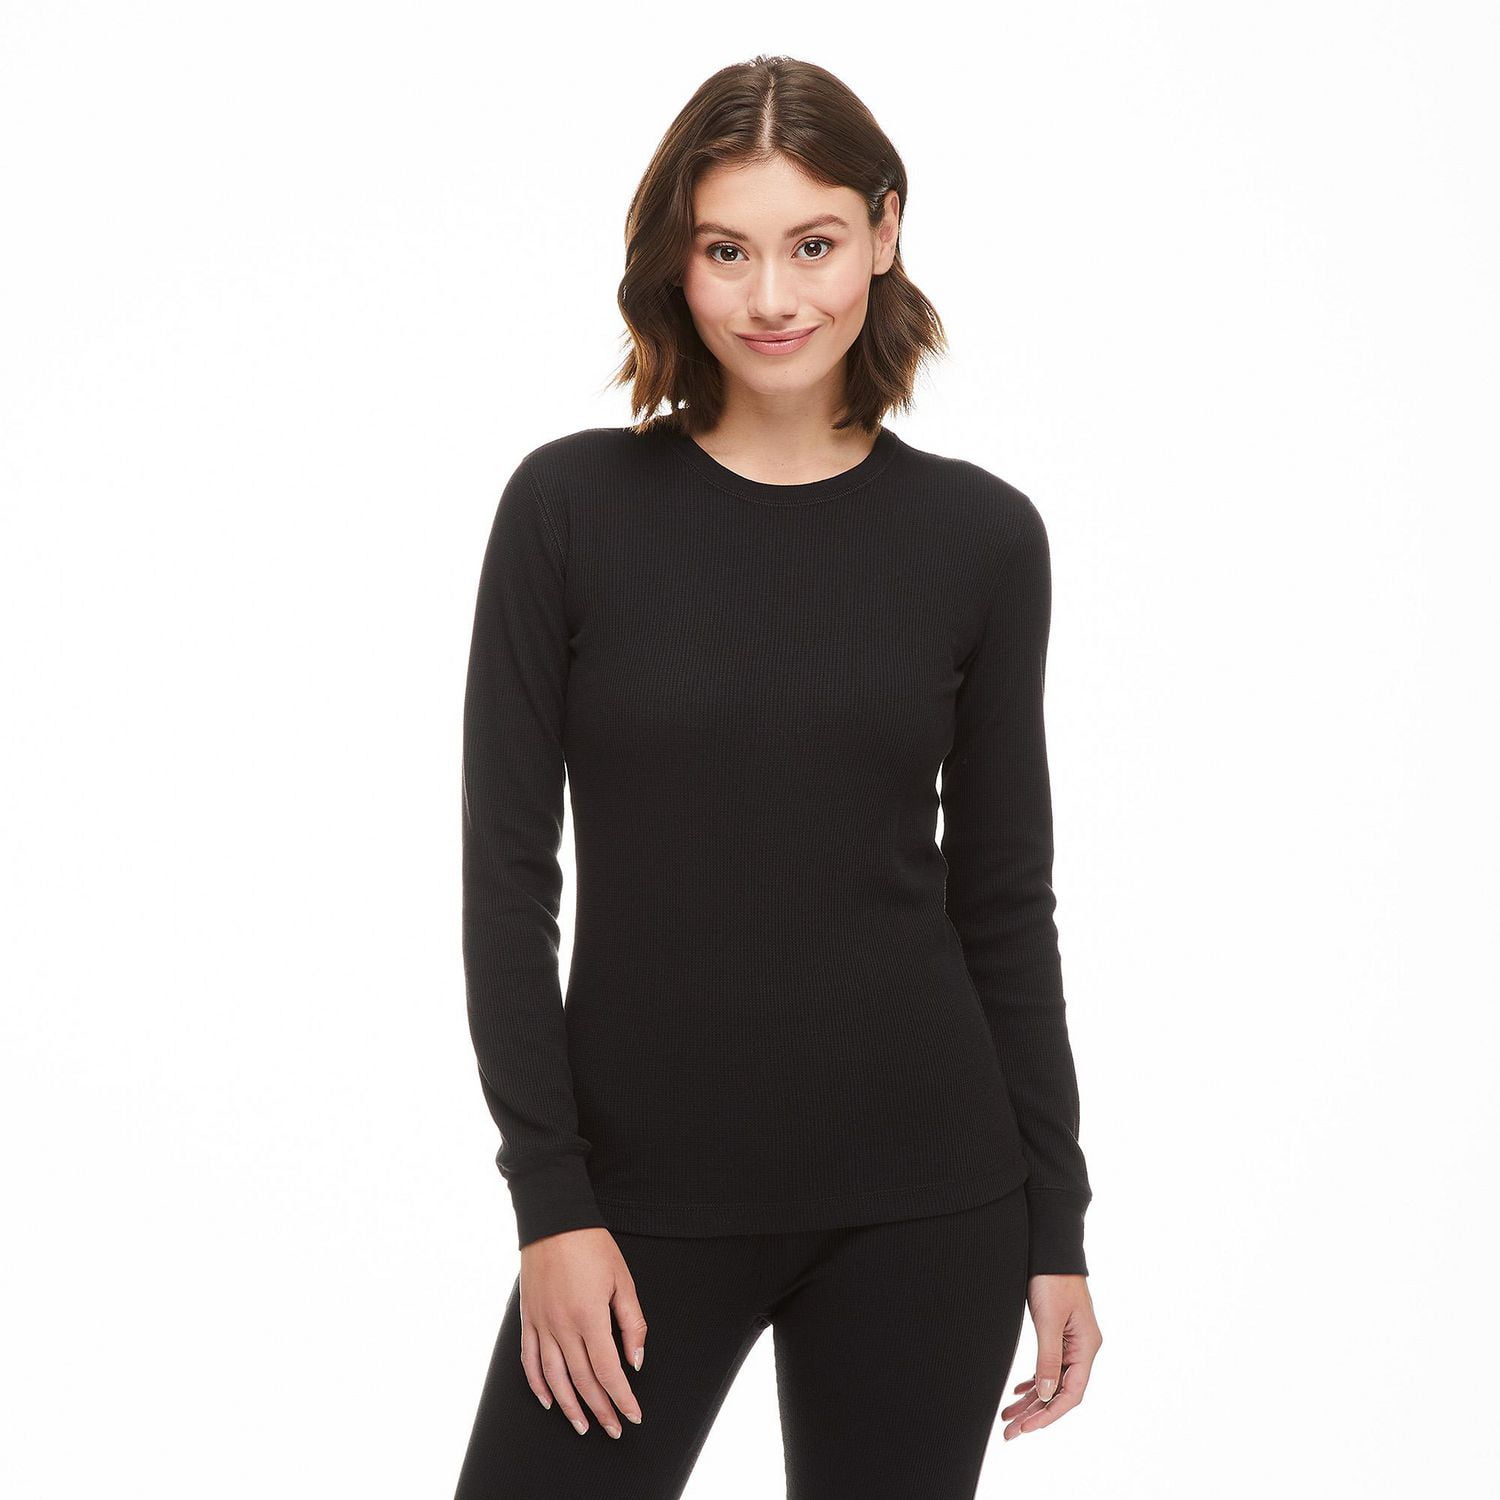 Buy Bodycare Black Solid Women Thermal Top Online at Low Prices in